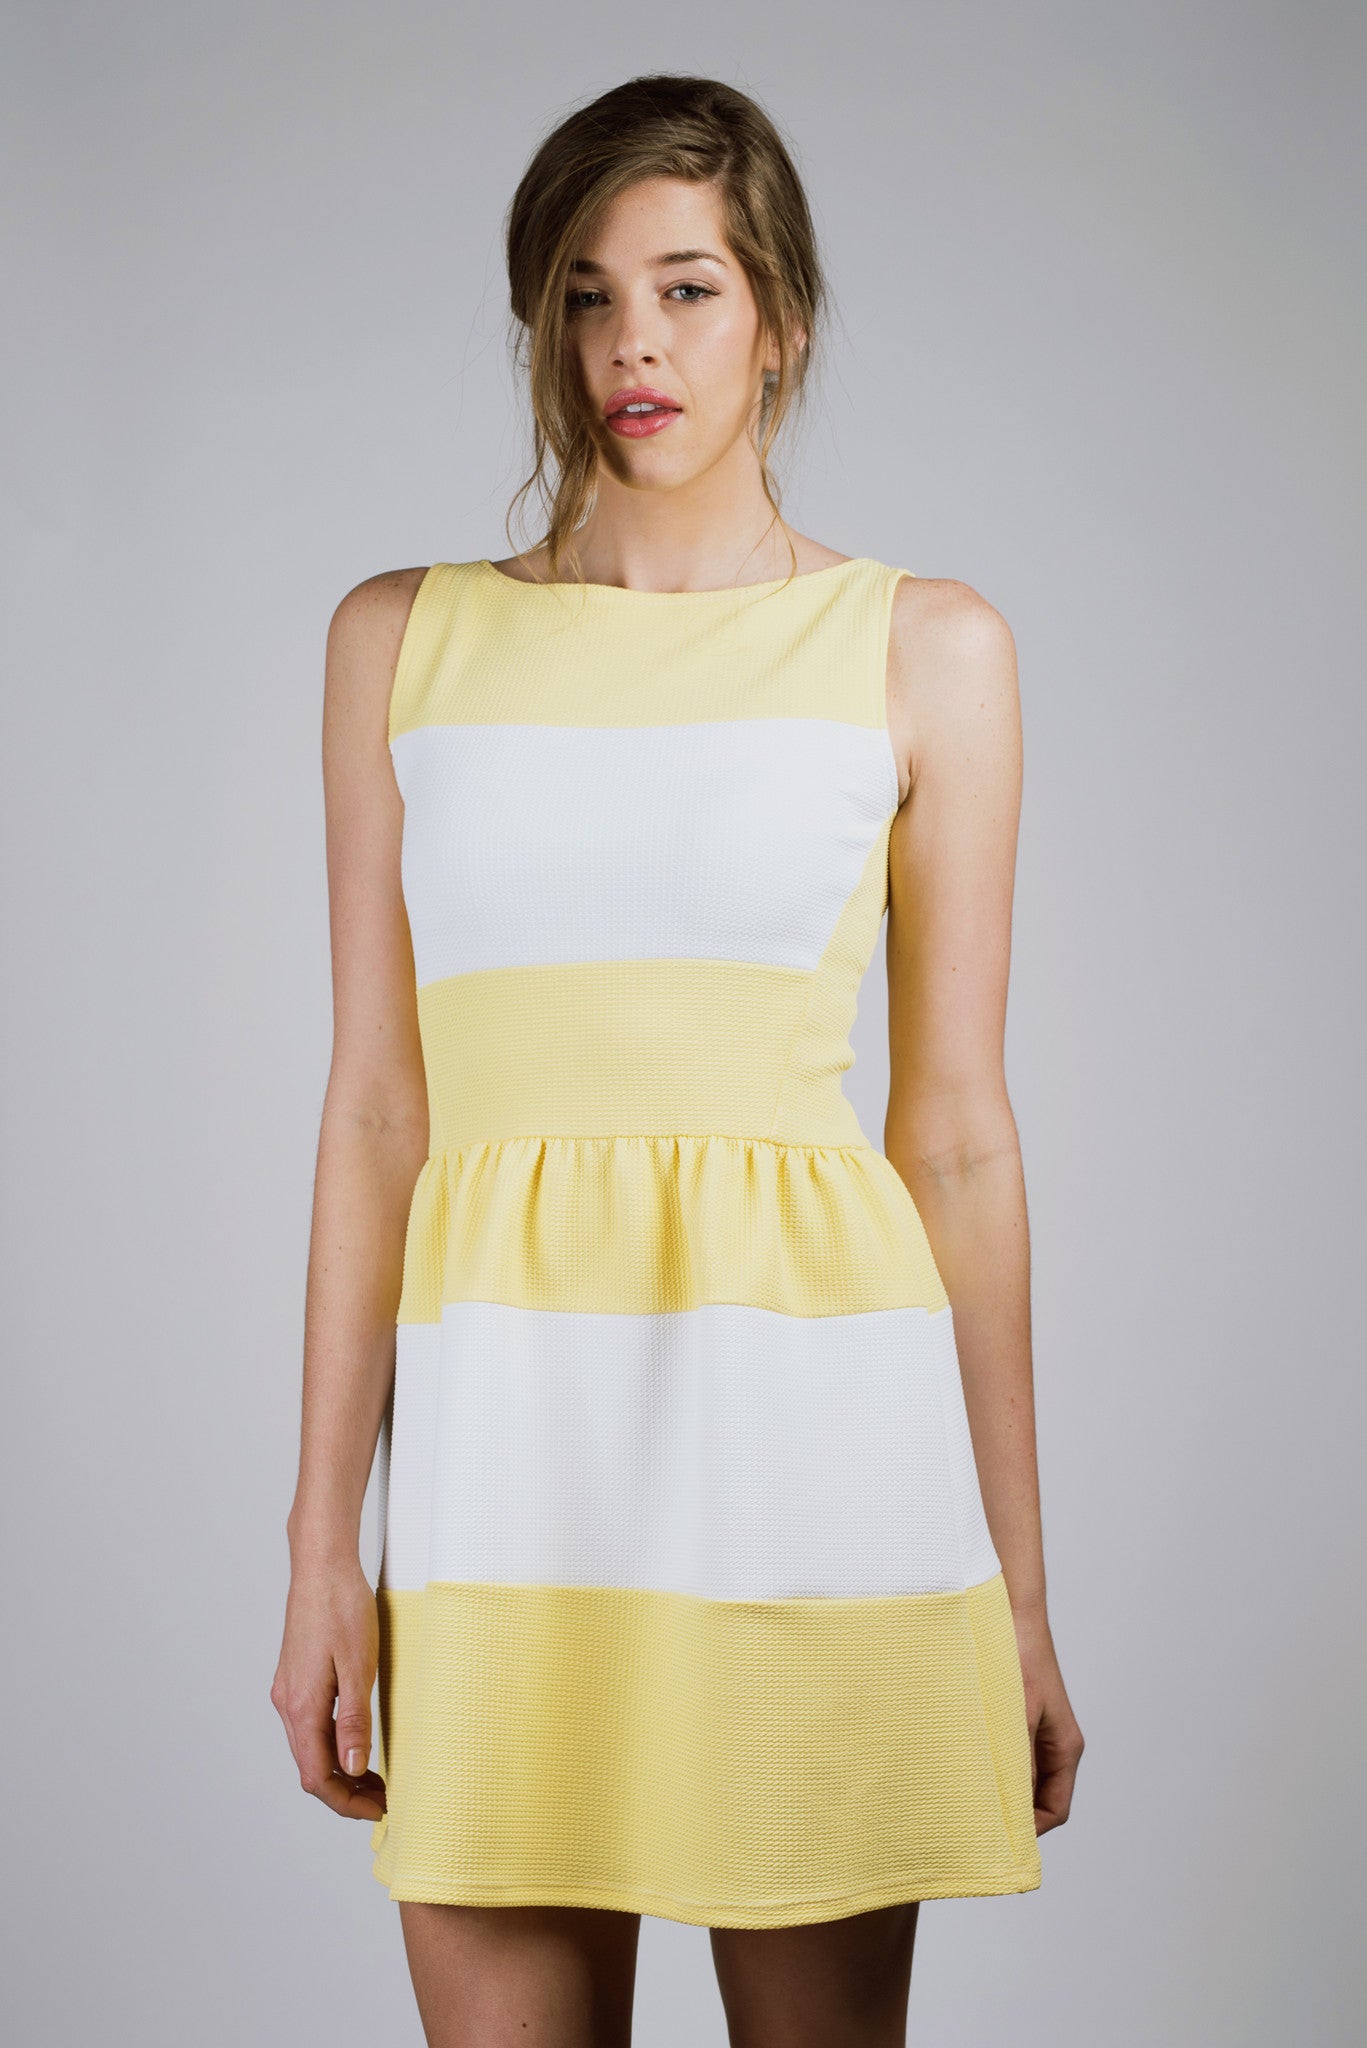 Yellow and White, Geometric Print, Striped Party Dress, Spring